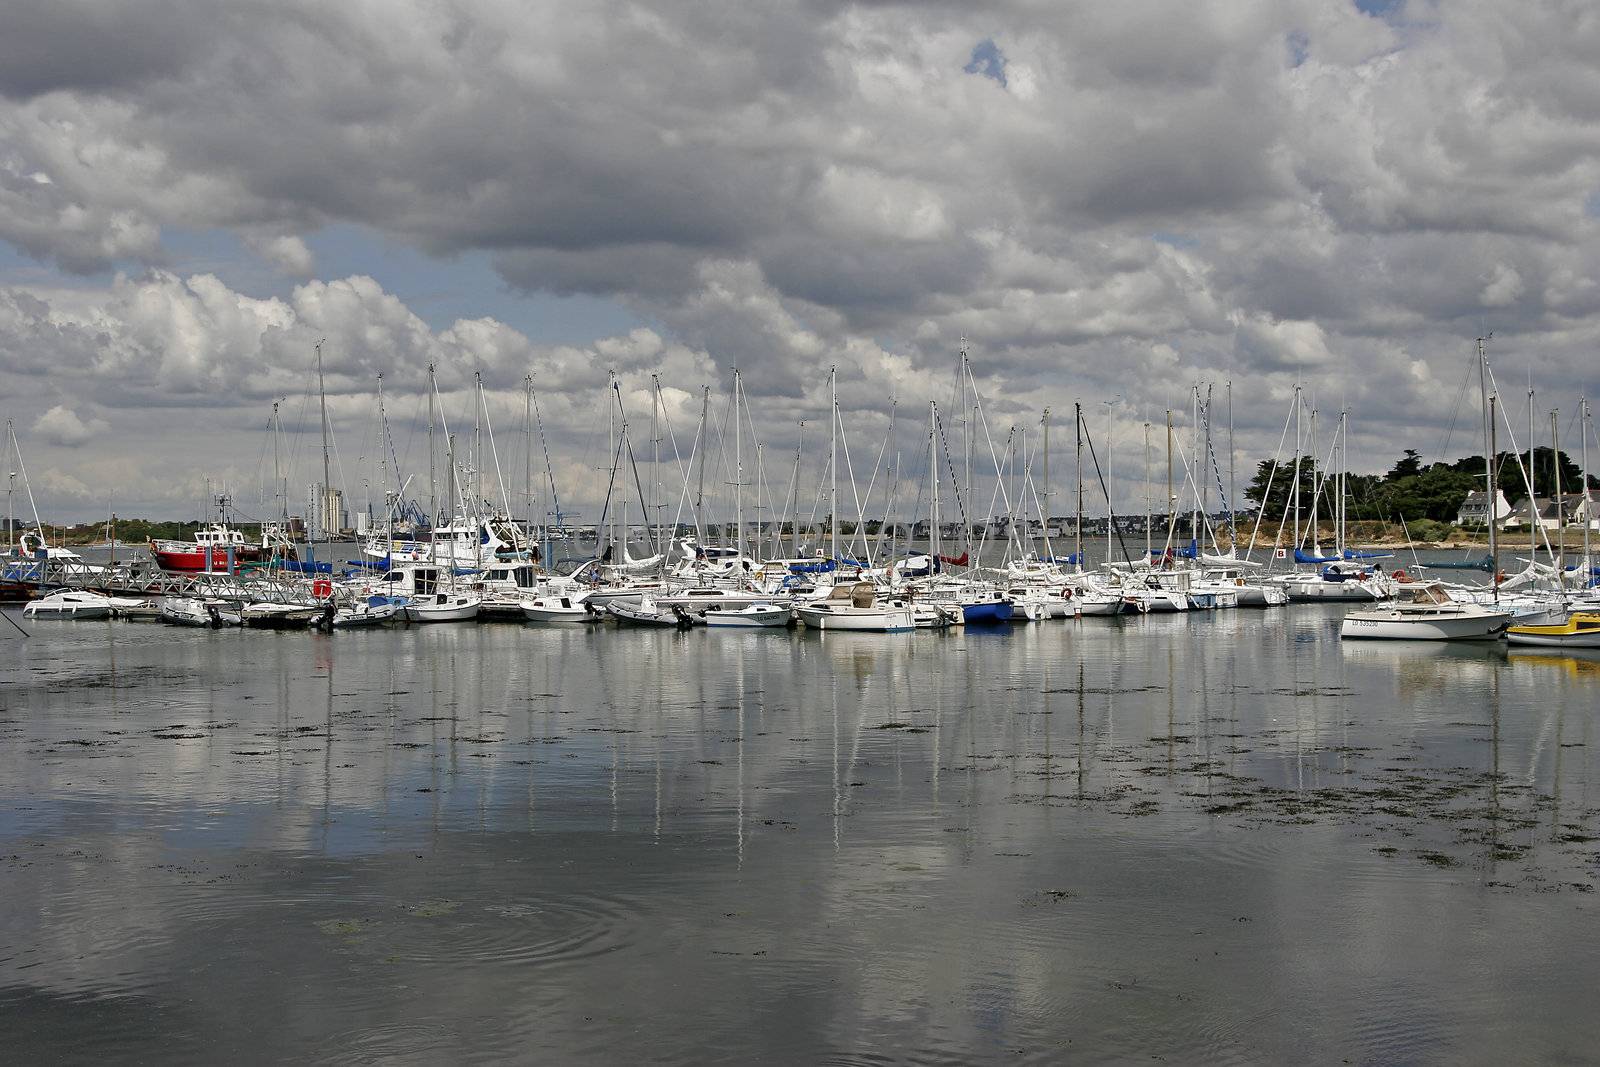 Port near Port-Louis, Brittany by Natureandmore